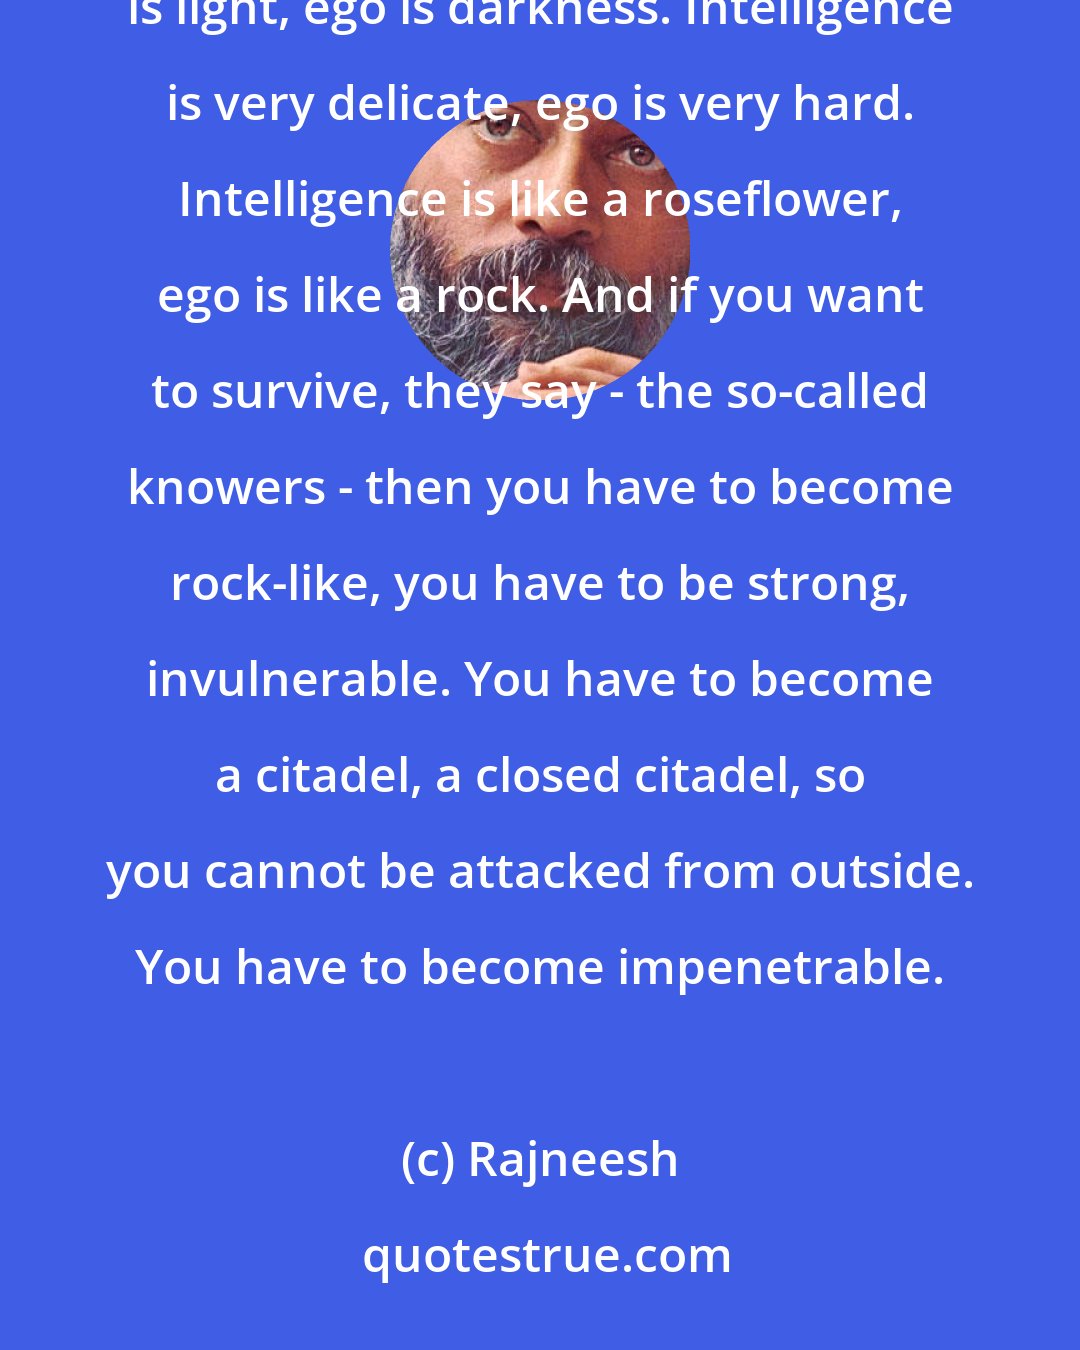 Rajneesh: As the ego becomes strong it starts surrounding intelligence like a thick layer of darkness. Intelligence is light, ego is darkness. Intelligence is very delicate, ego is very hard. Intelligence is like a roseflower, ego is like a rock. And if you want to survive, they say - the so-called knowers - then you have to become rock-like, you have to be strong, invulnerable. You have to become a citadel, a closed citadel, so you cannot be attacked from outside. You have to become impenetrable.